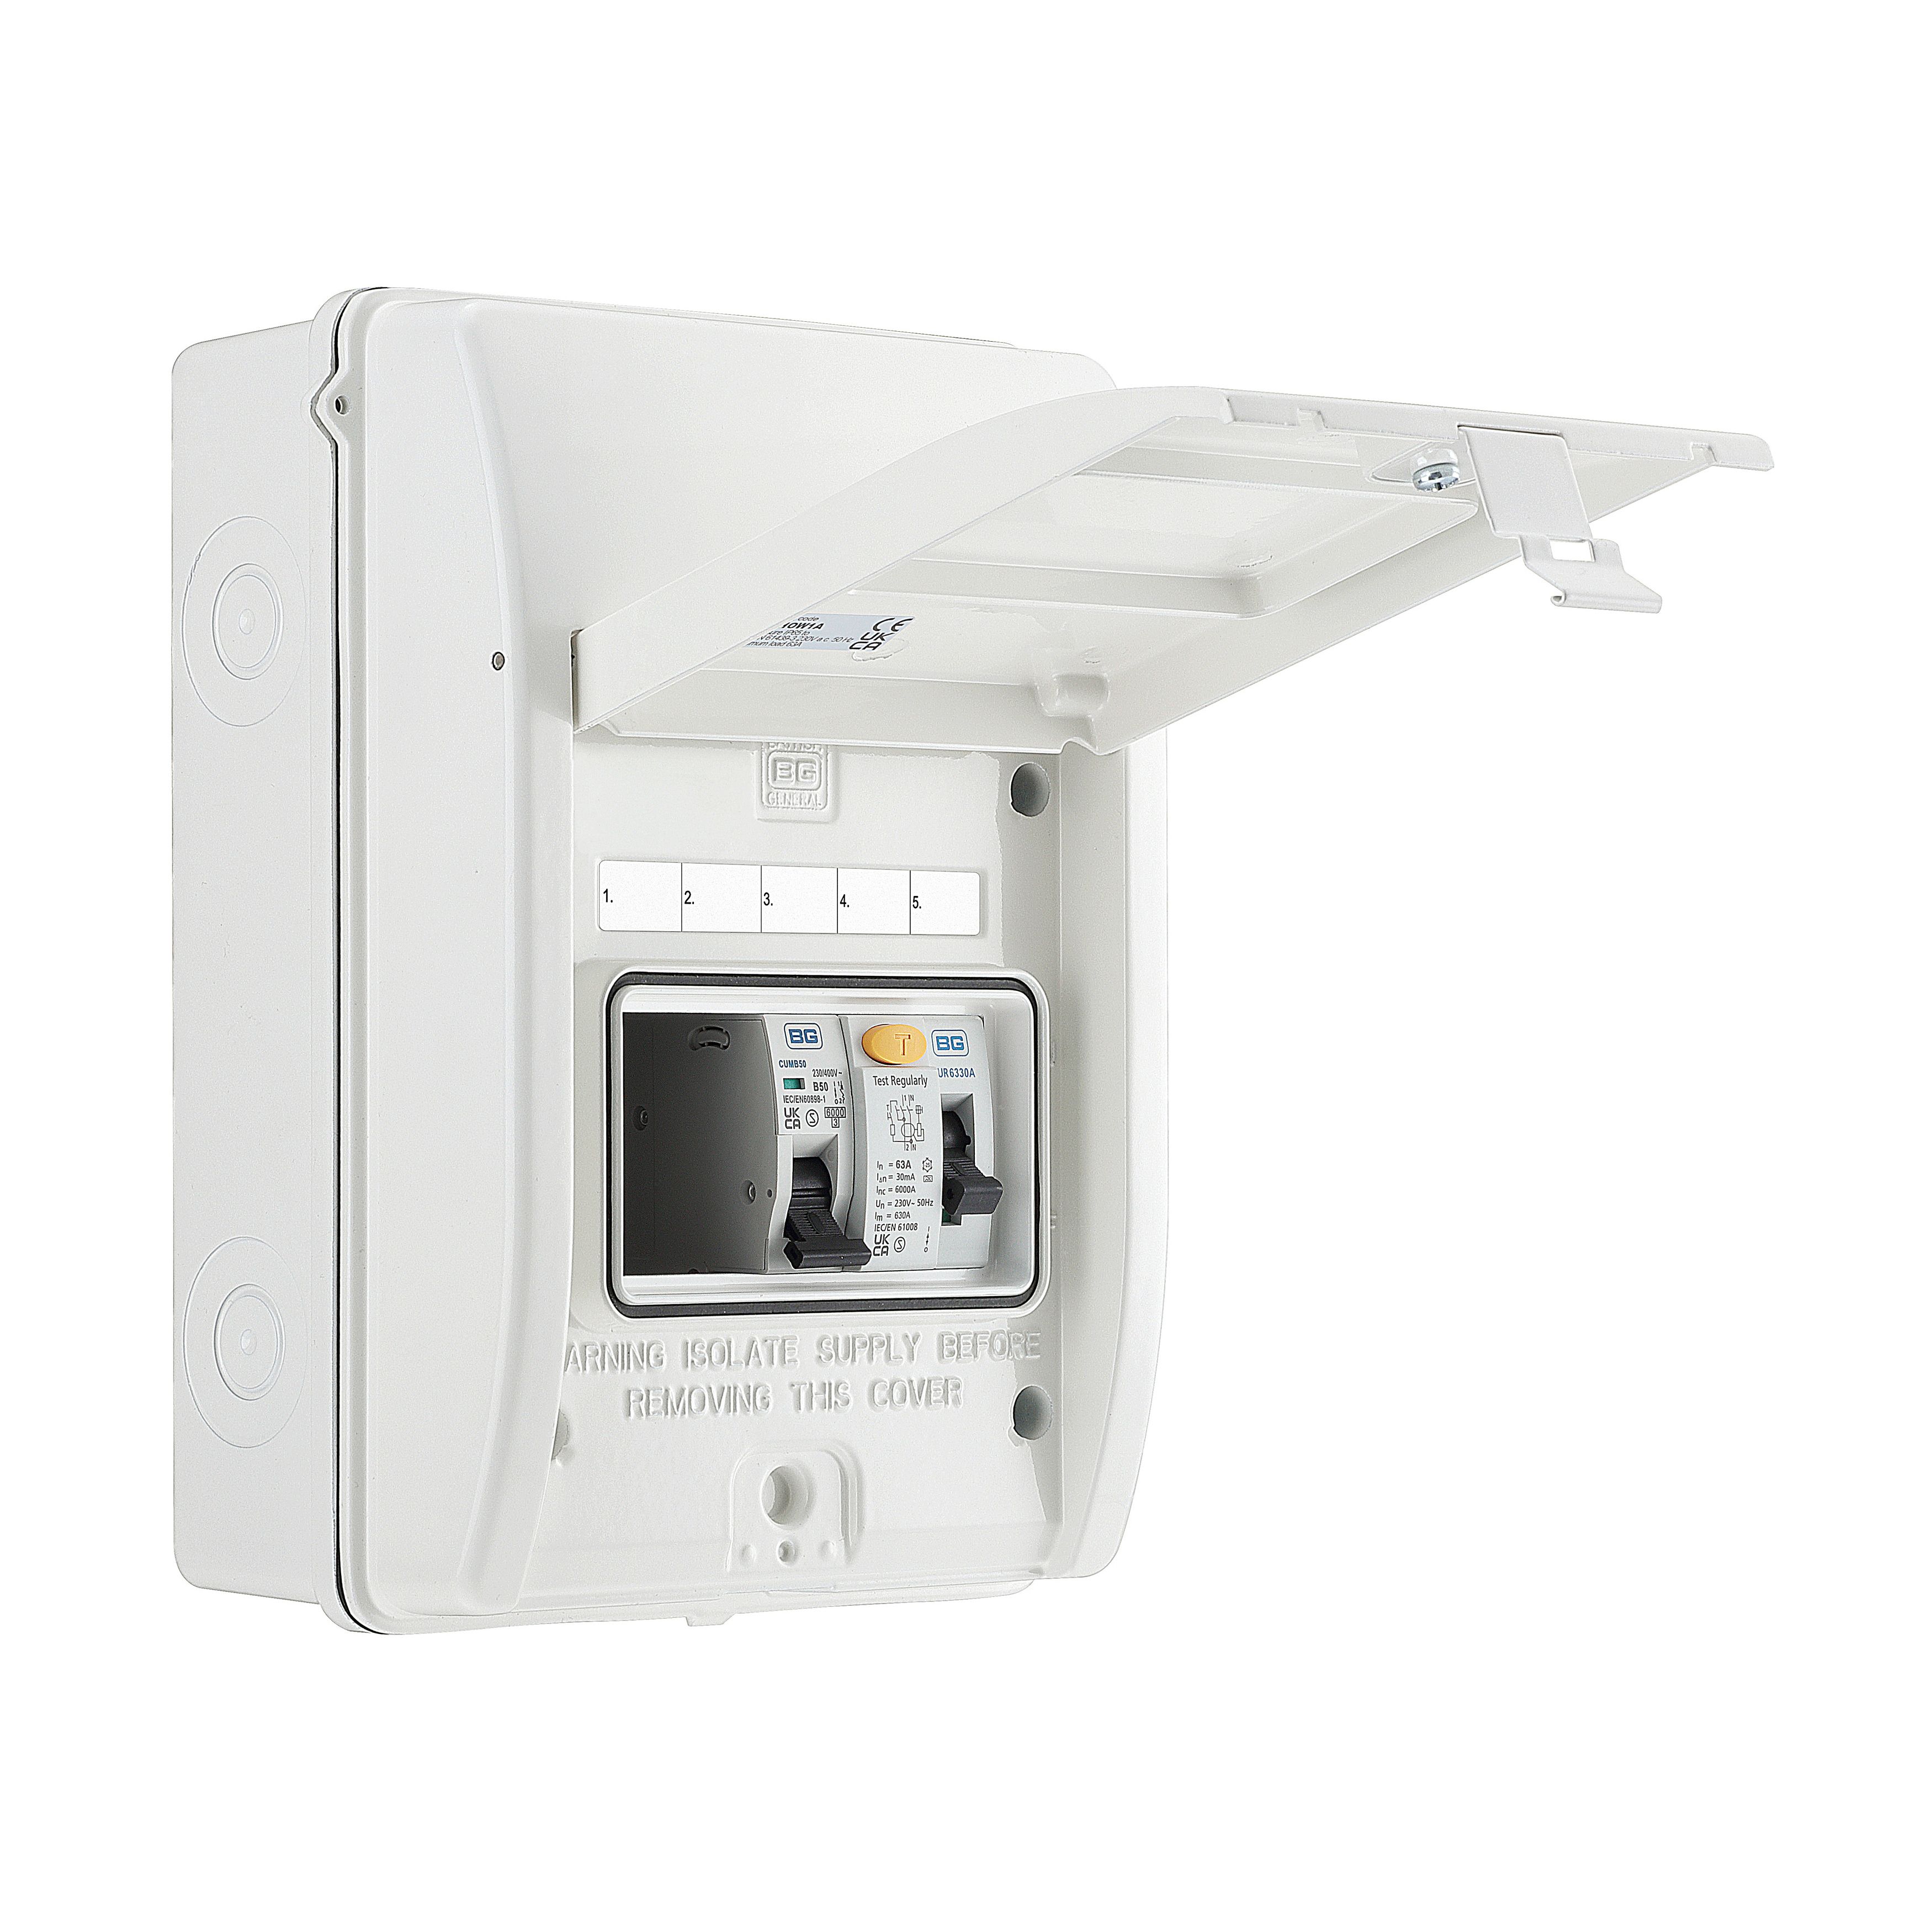 BG Fortress Shower Consumer unit with 63A main switch